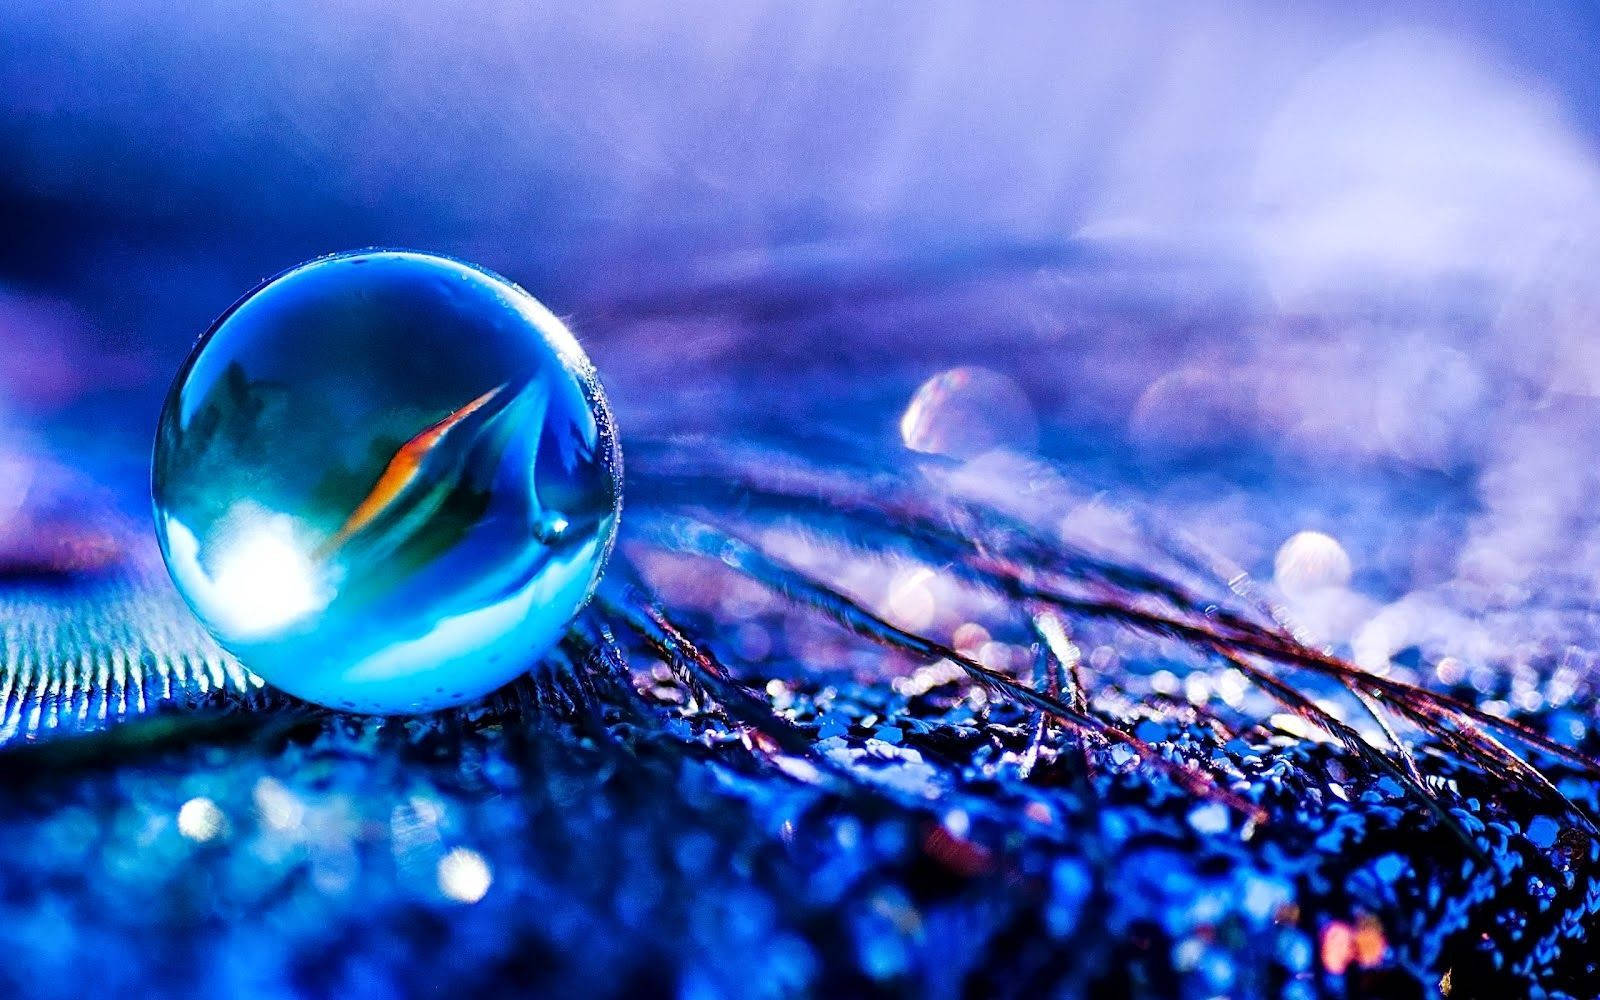 Animated closer look of a marble ball, HD wallpaper.